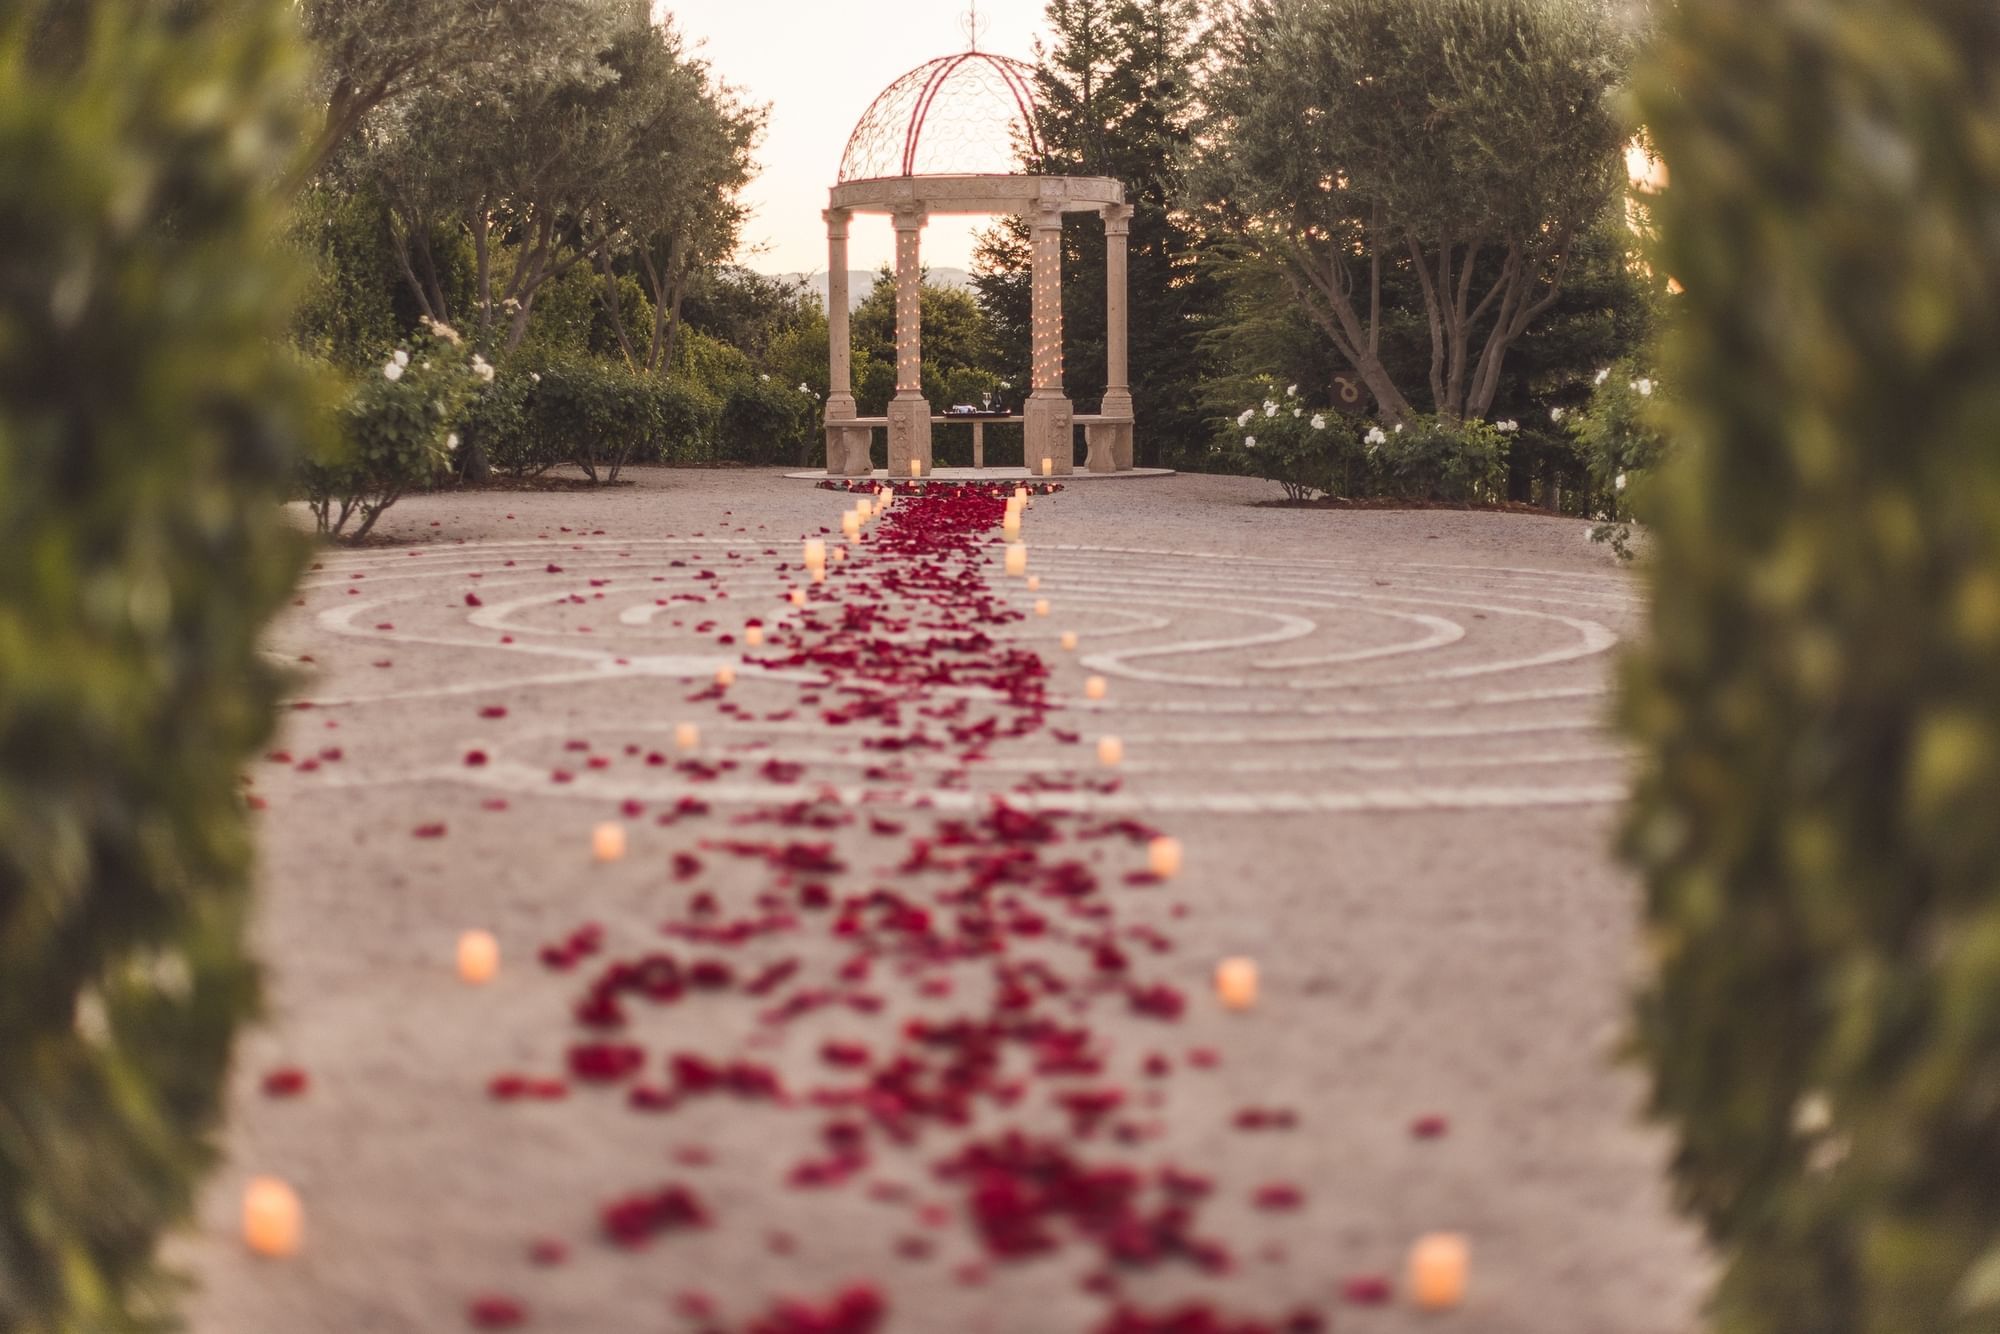 Red rose petals and candles leading to white column gazebo